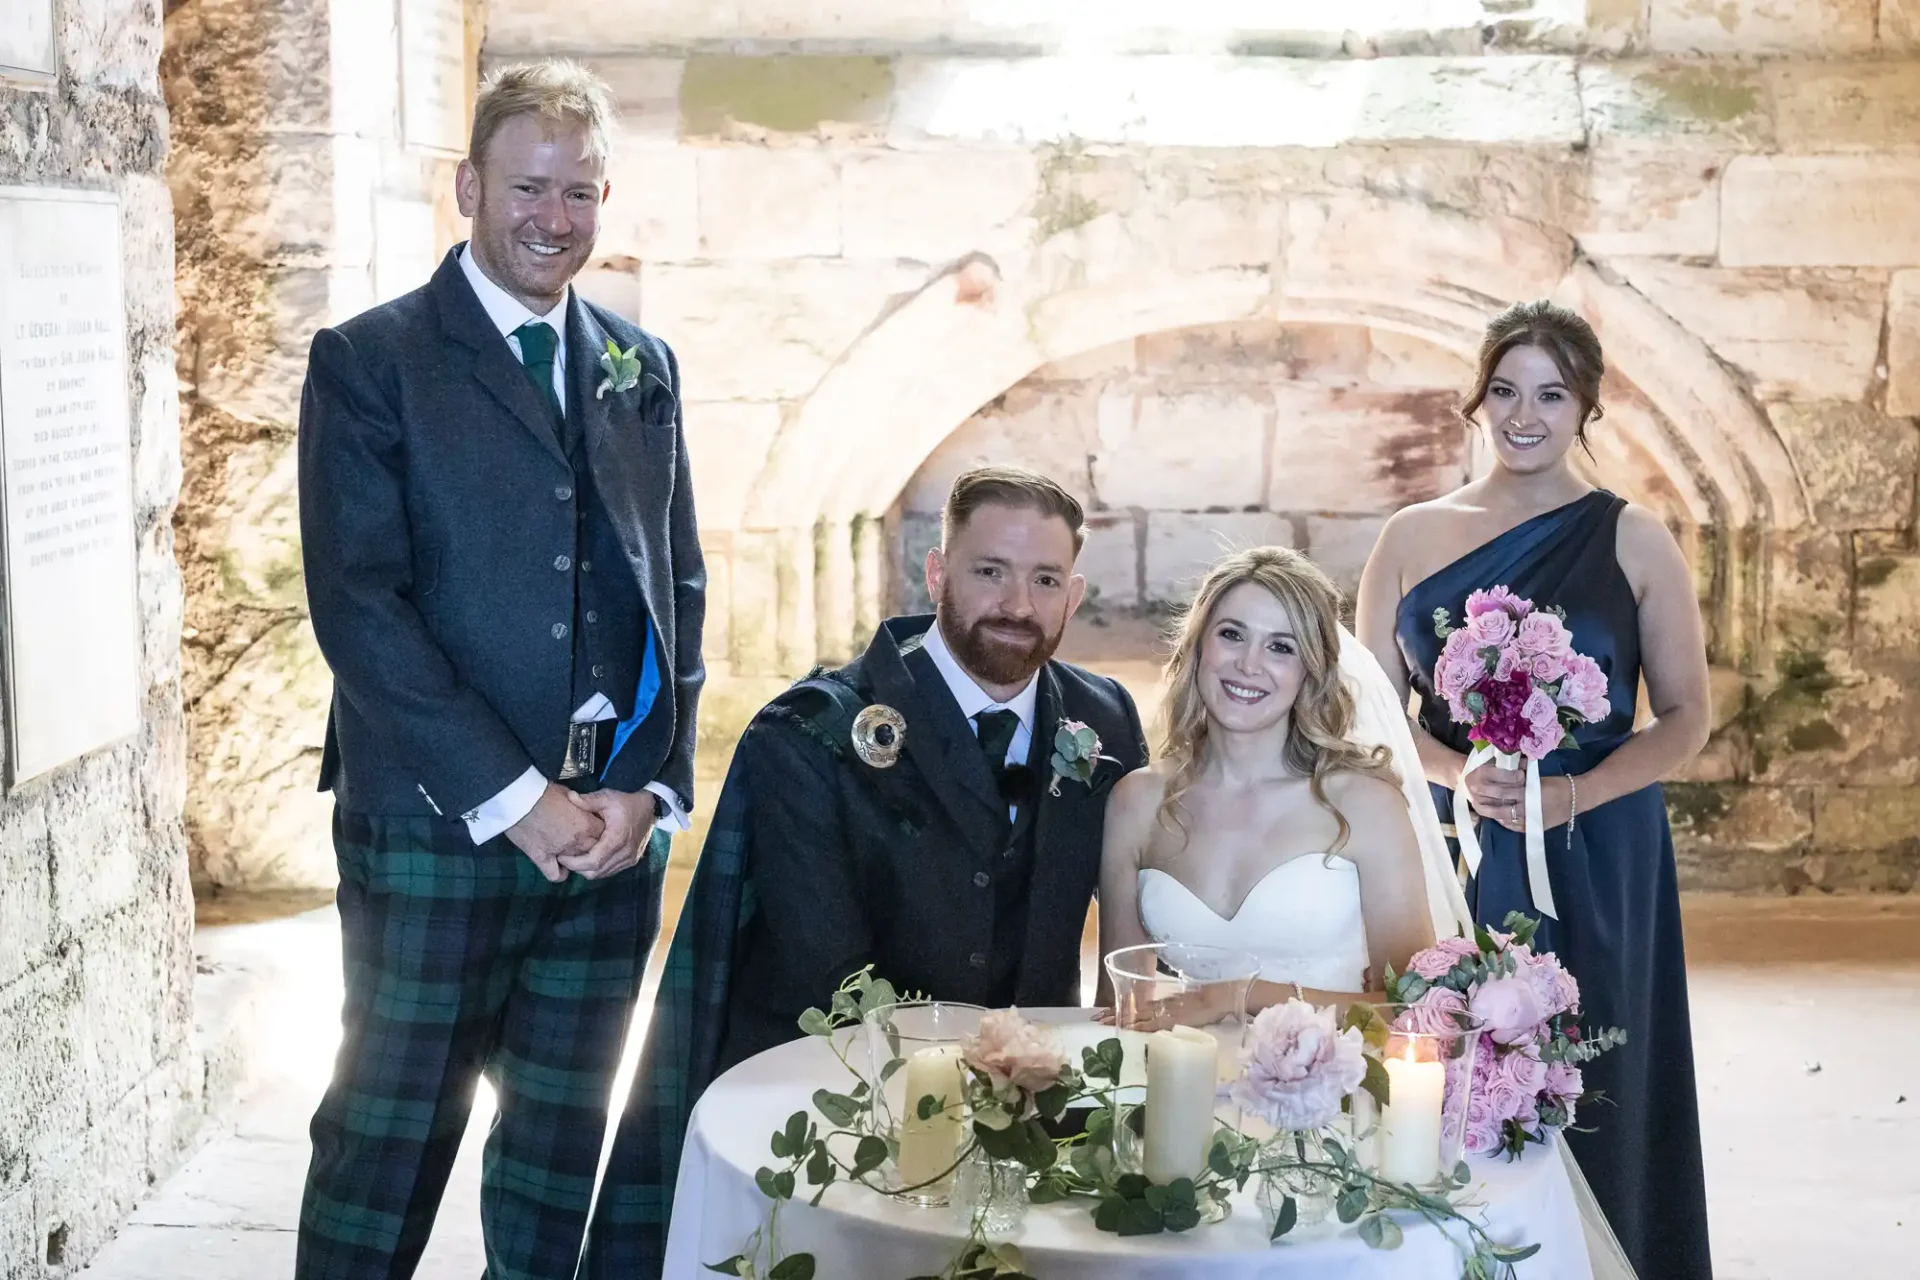 A bride and groom seated at a wedding table, smiling, flanked by a best man and a bridesmaid, in a stone-walled venue.